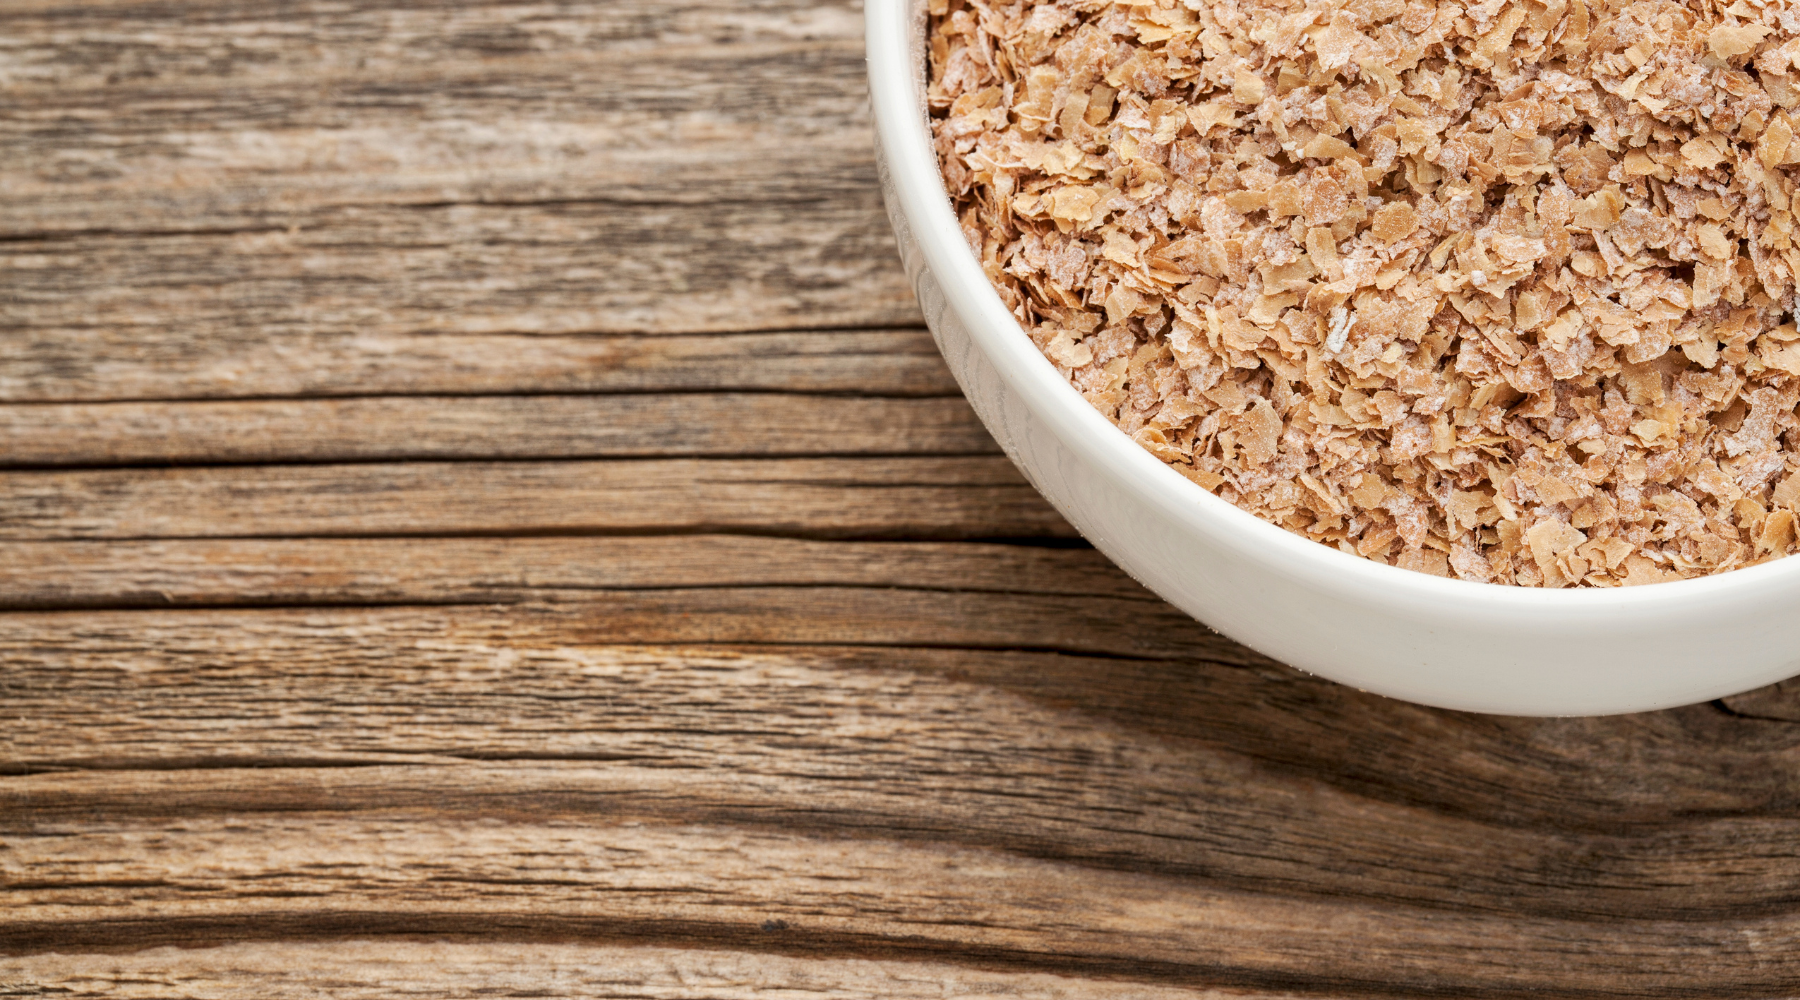 Wheat Germ Vs. Wheat Bran - The Differences You Need To Know